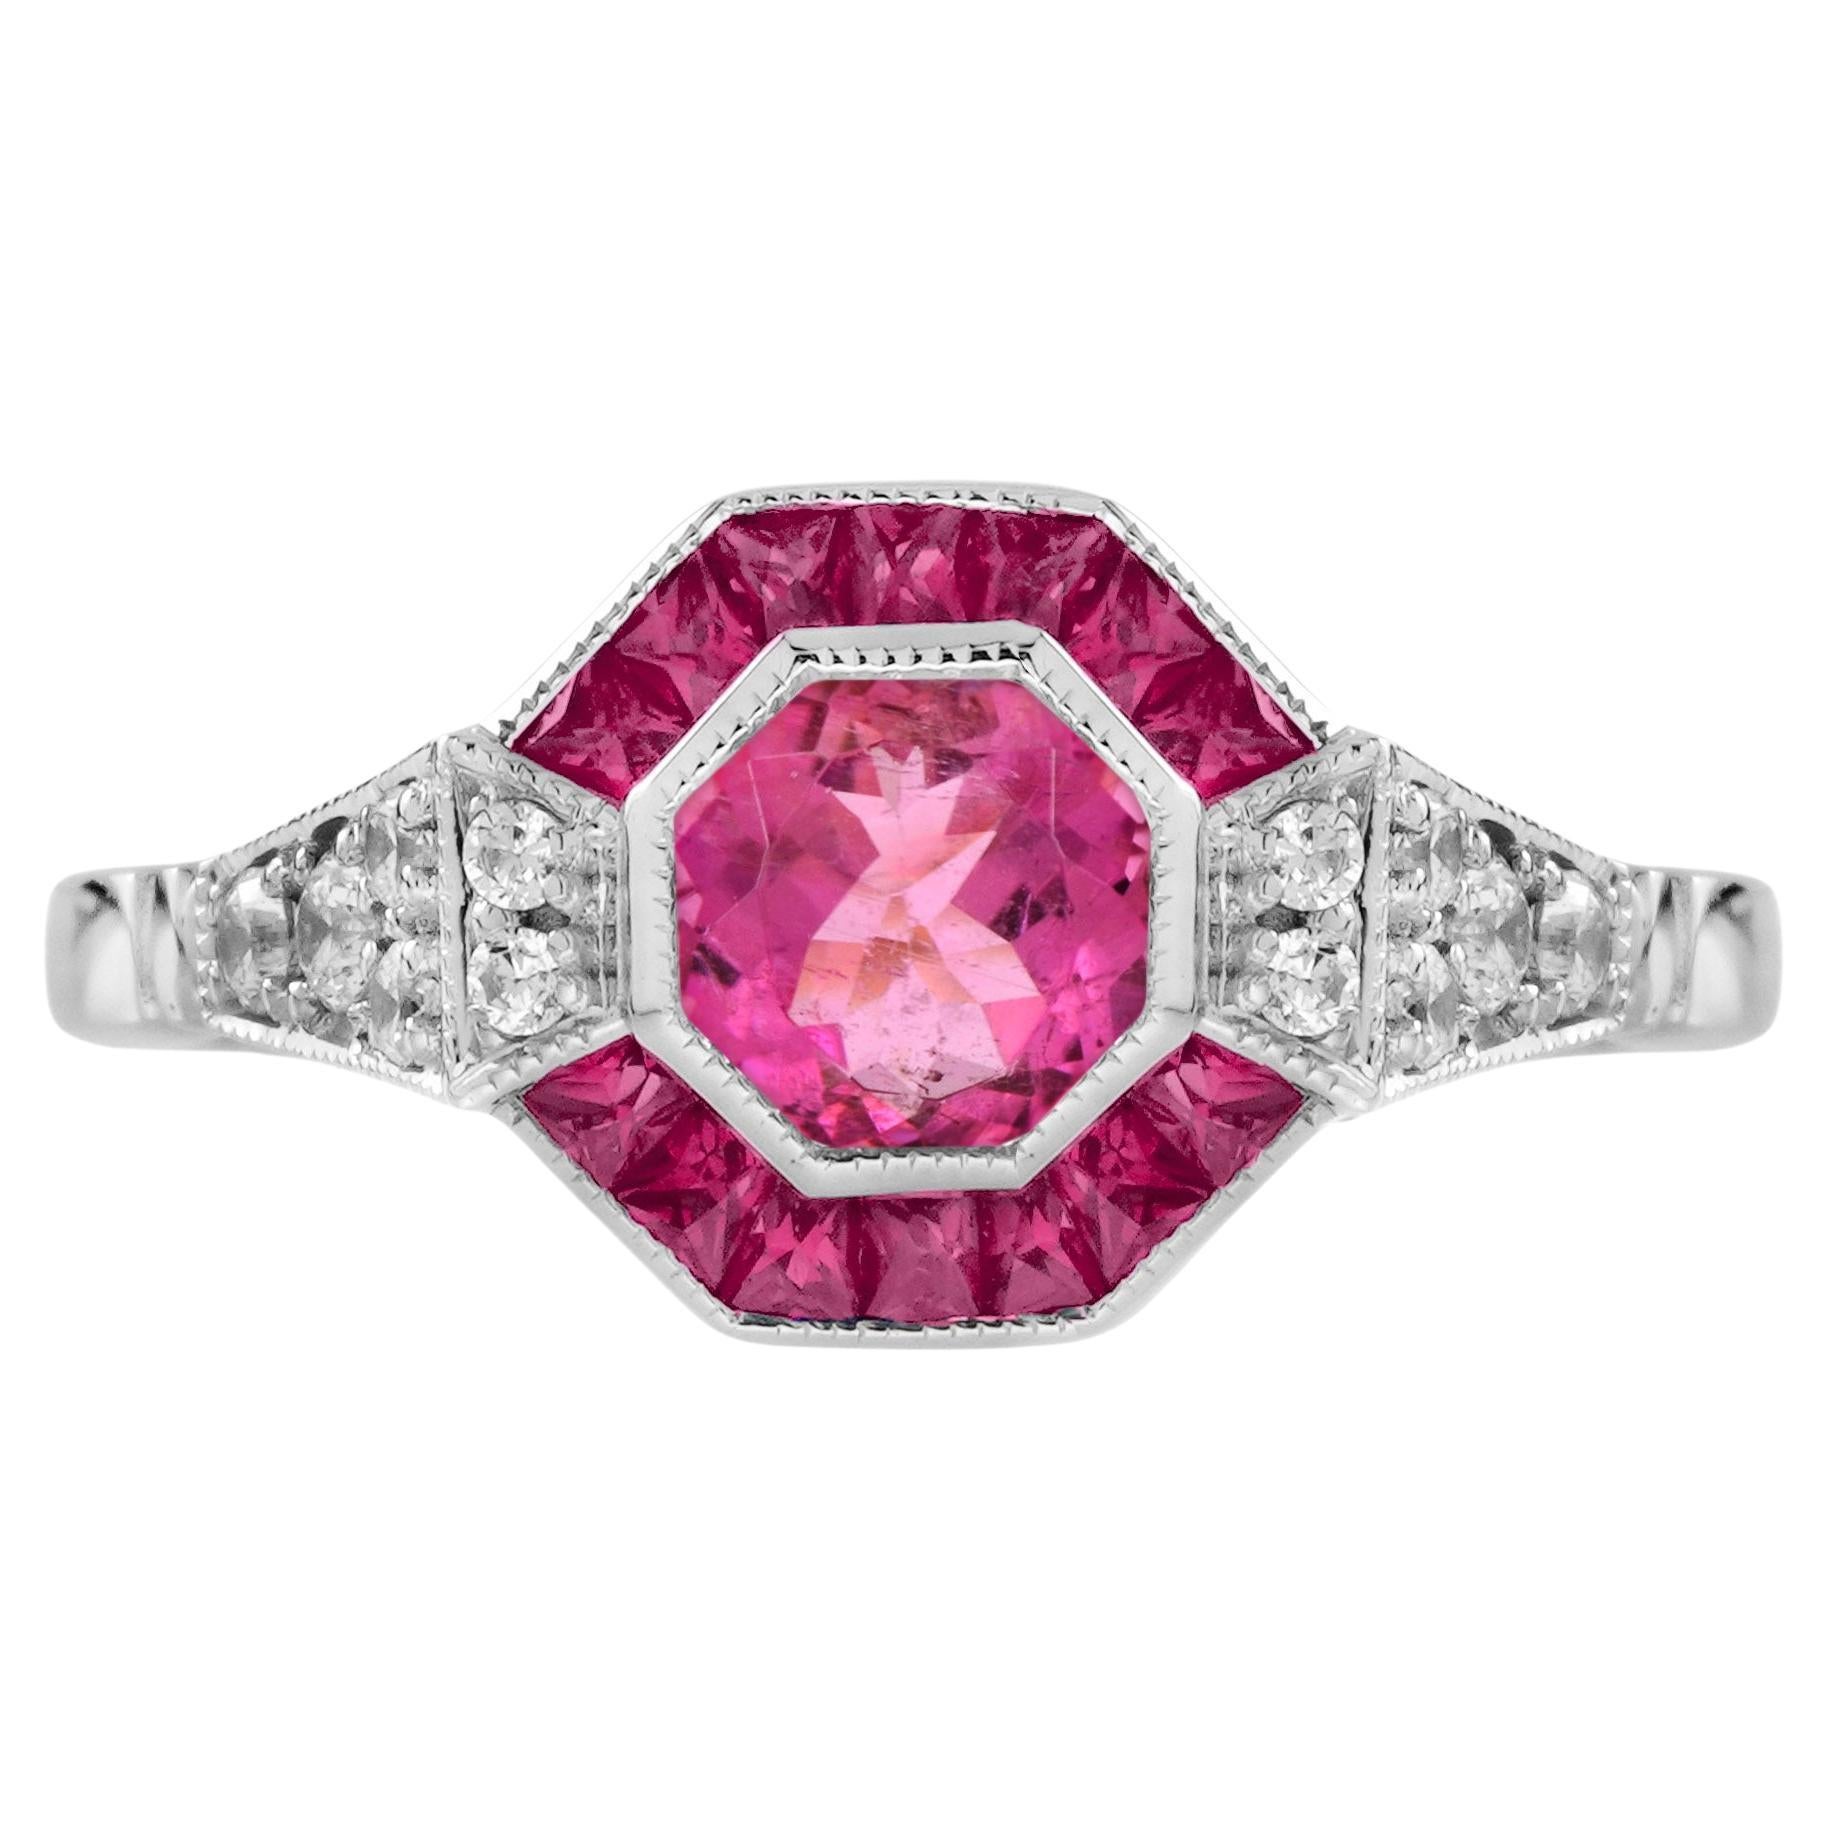 Pink Tourmaline Ruby Diamond Art Deco Style Engagement Ring in 18K White Gold